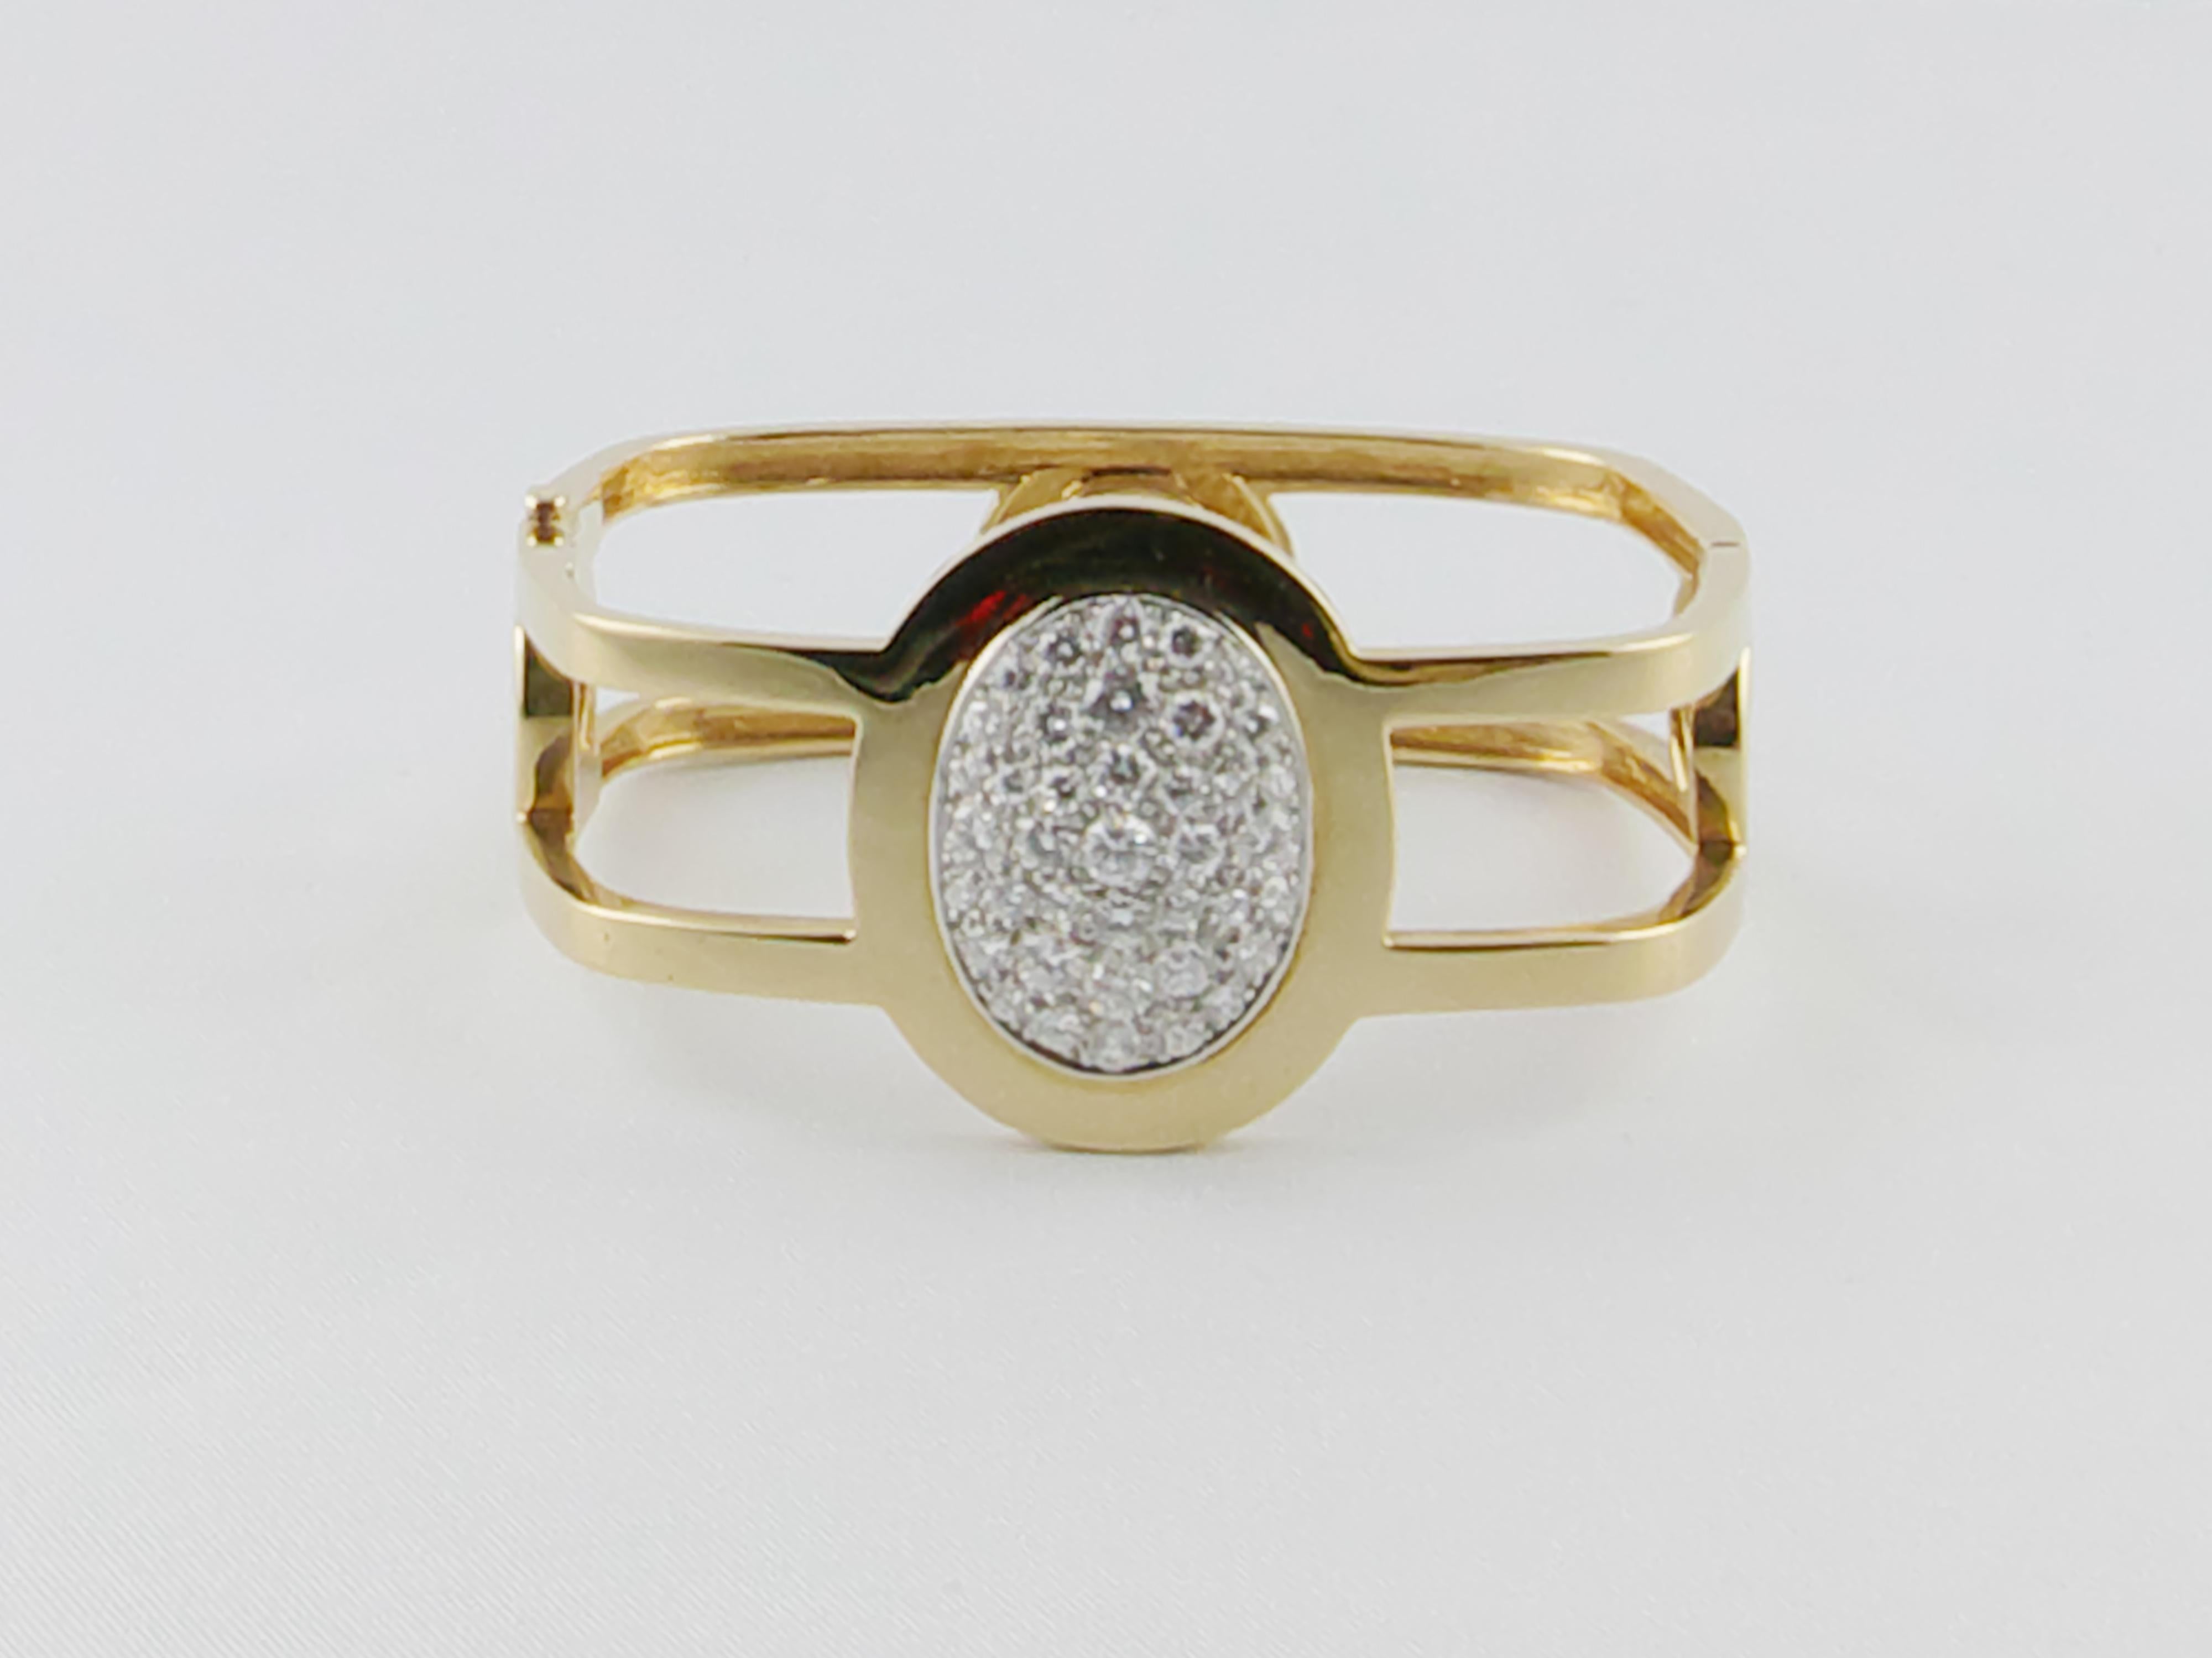 A stunning and sleek 1970s  18K yellow gold bangle bracelet set with diamonds. The shape is a soft square with approx 1.8 cts diamond pavé oval shaped element in the centre. The bold and geometric design make it chic, fashionable and extremely